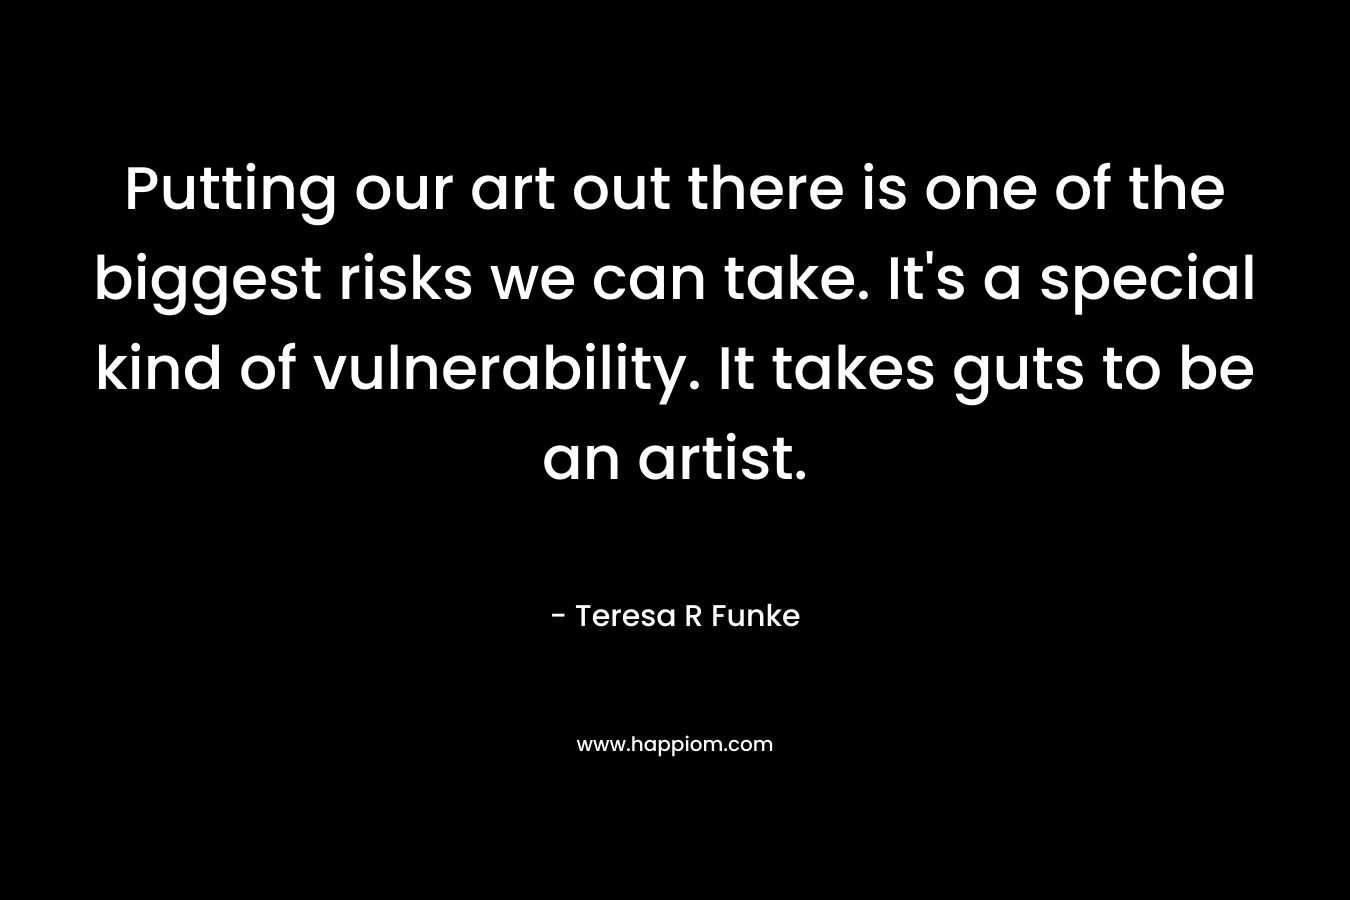 Putting our art out there is one of the biggest risks we can take. It's a special kind of vulnerability. It takes guts to be an artist.